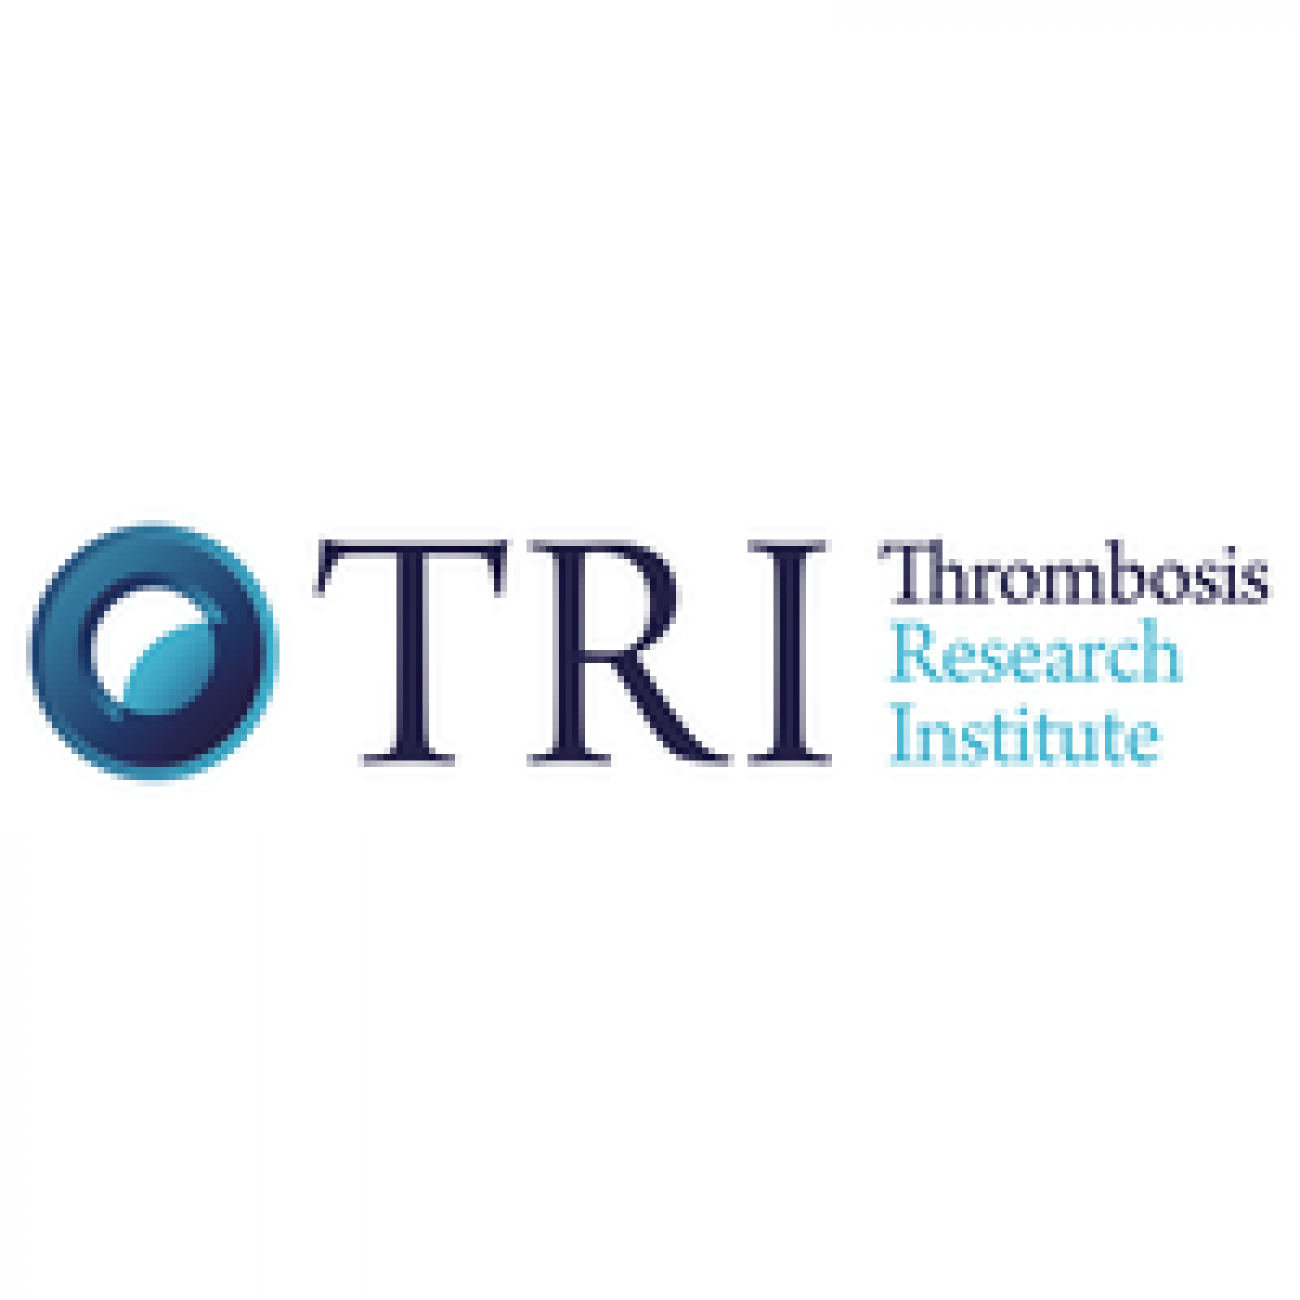 Department of Clinical Research, Thrombosis Research Institute, London, United Kingdom